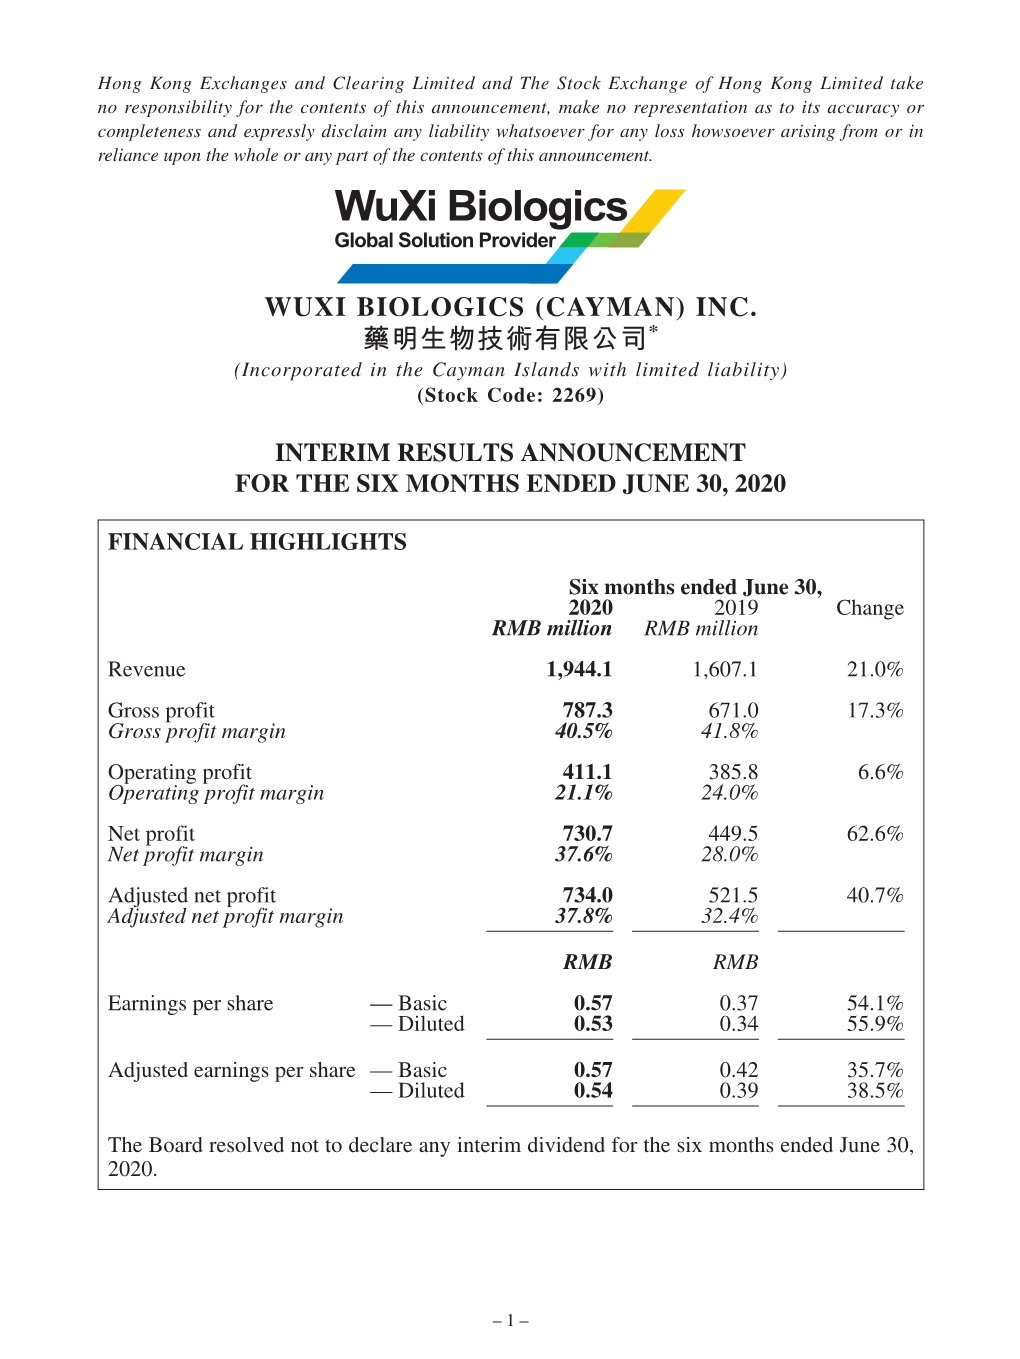 WUXI BIOLOGICS (CAYMAN) INC. 藥明生物技術有限公司* (Incorporated in the Cayman Islands with Limited Liability) (Stock Code: 2269)